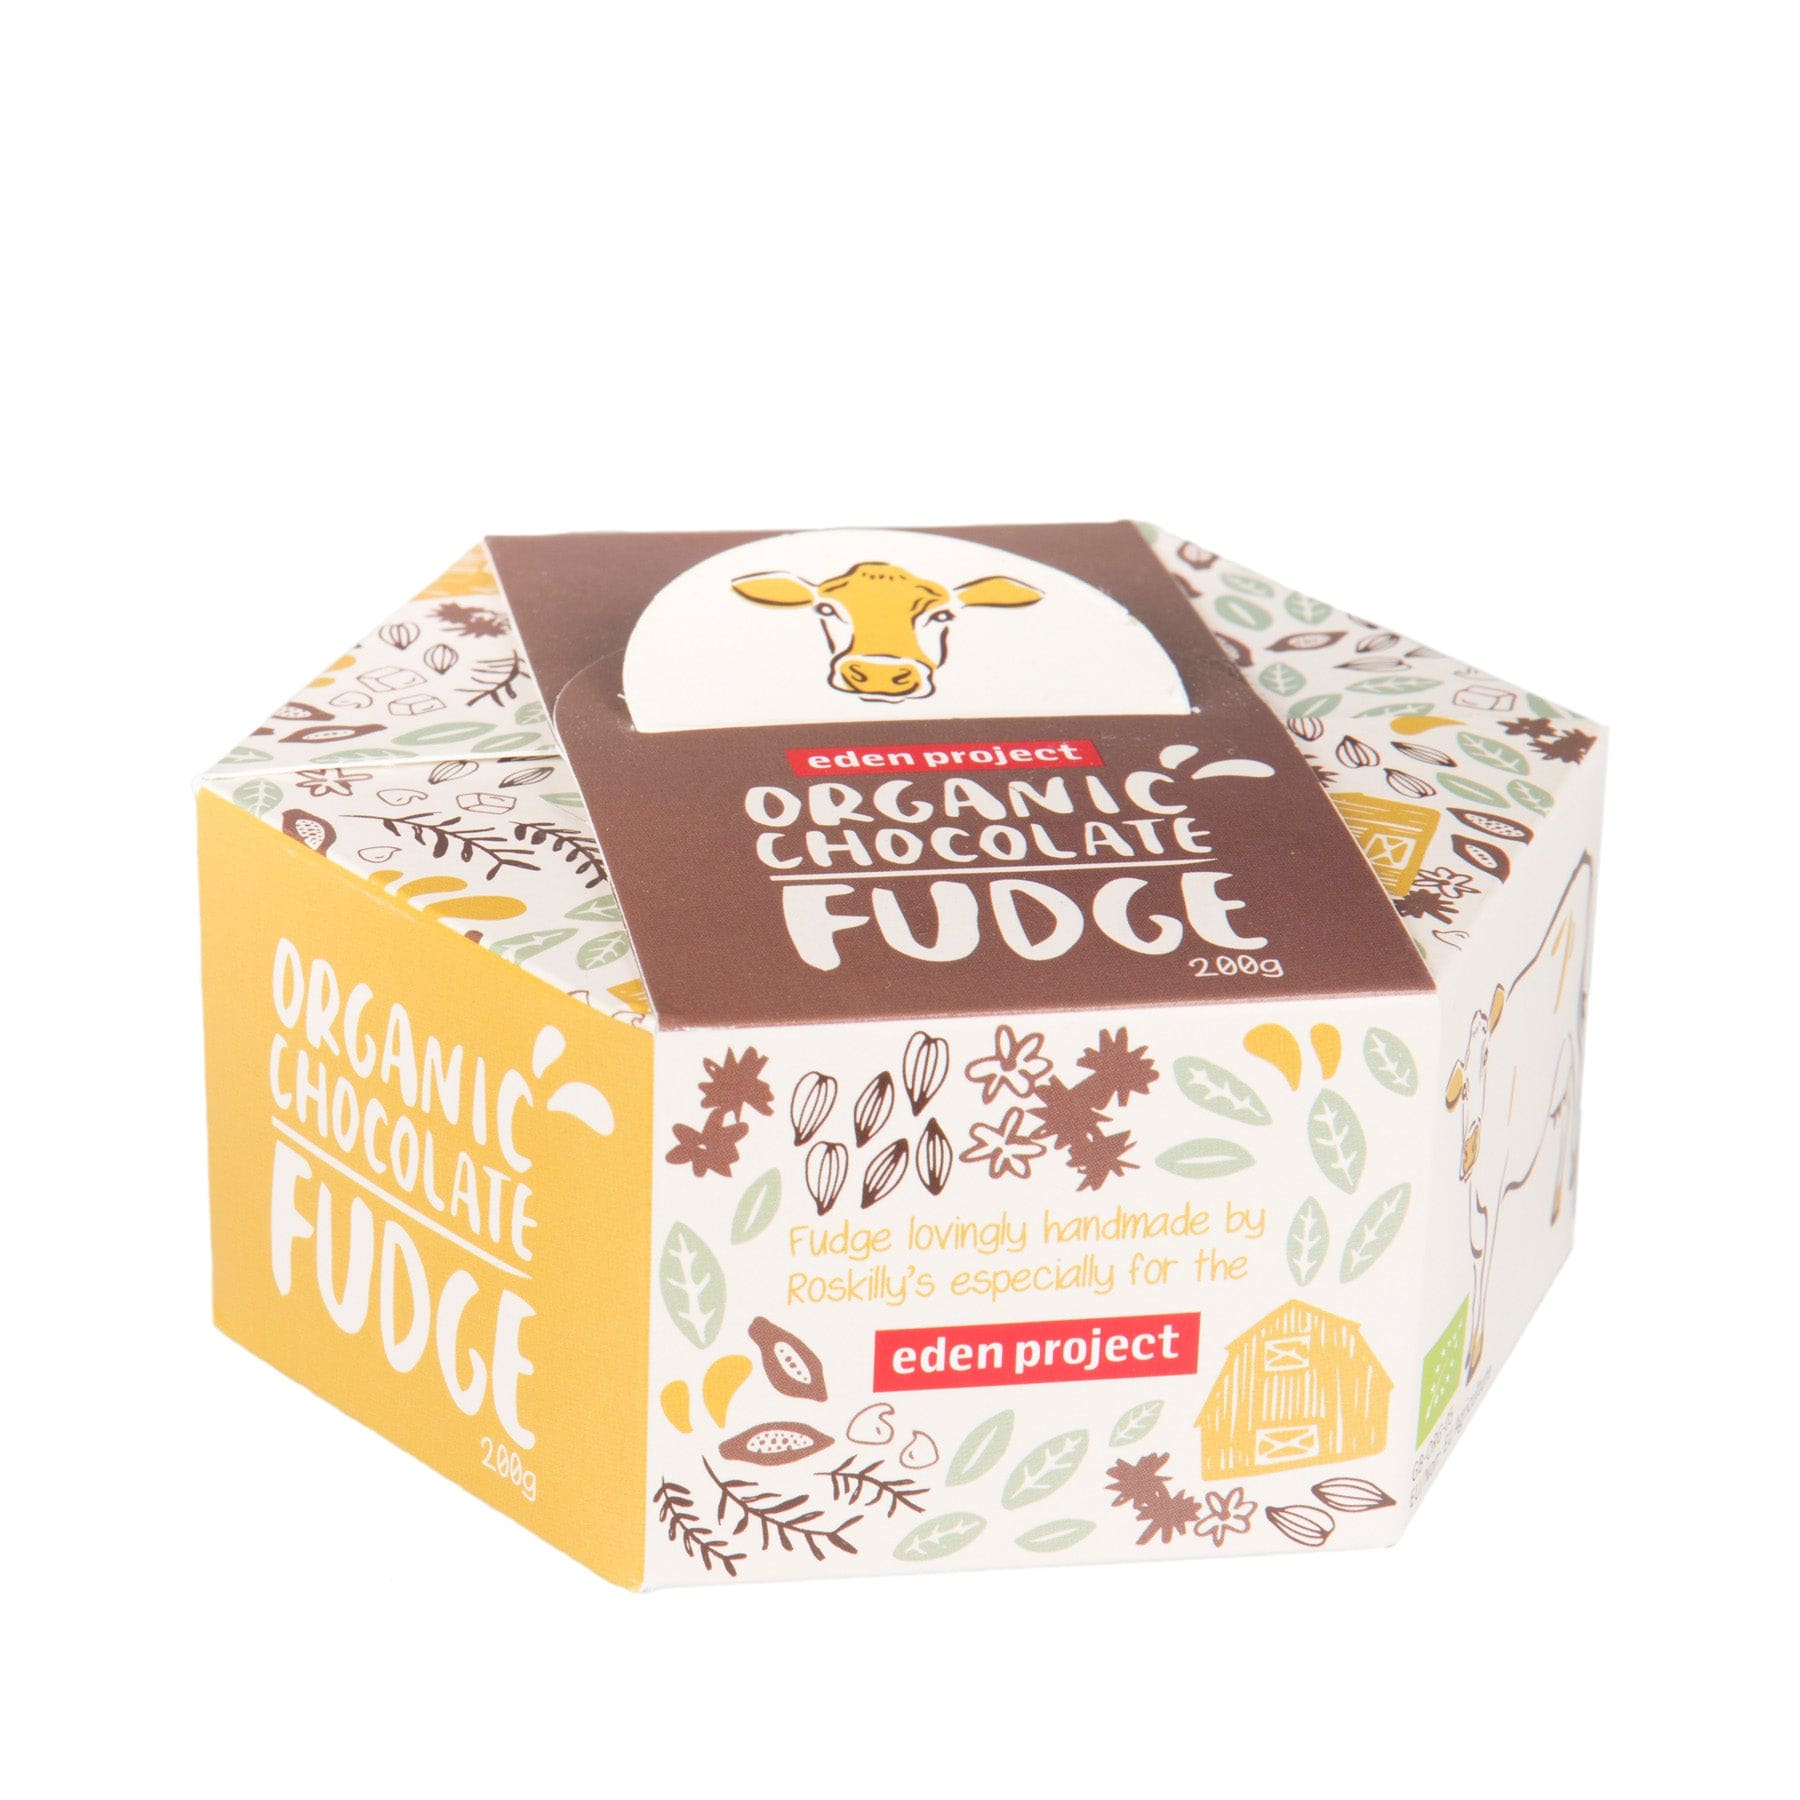 Eden Project organic chocolate fudge packaging, eco-friendly snack box design, handmade confectionery, sustainable food product, 200g weight indication